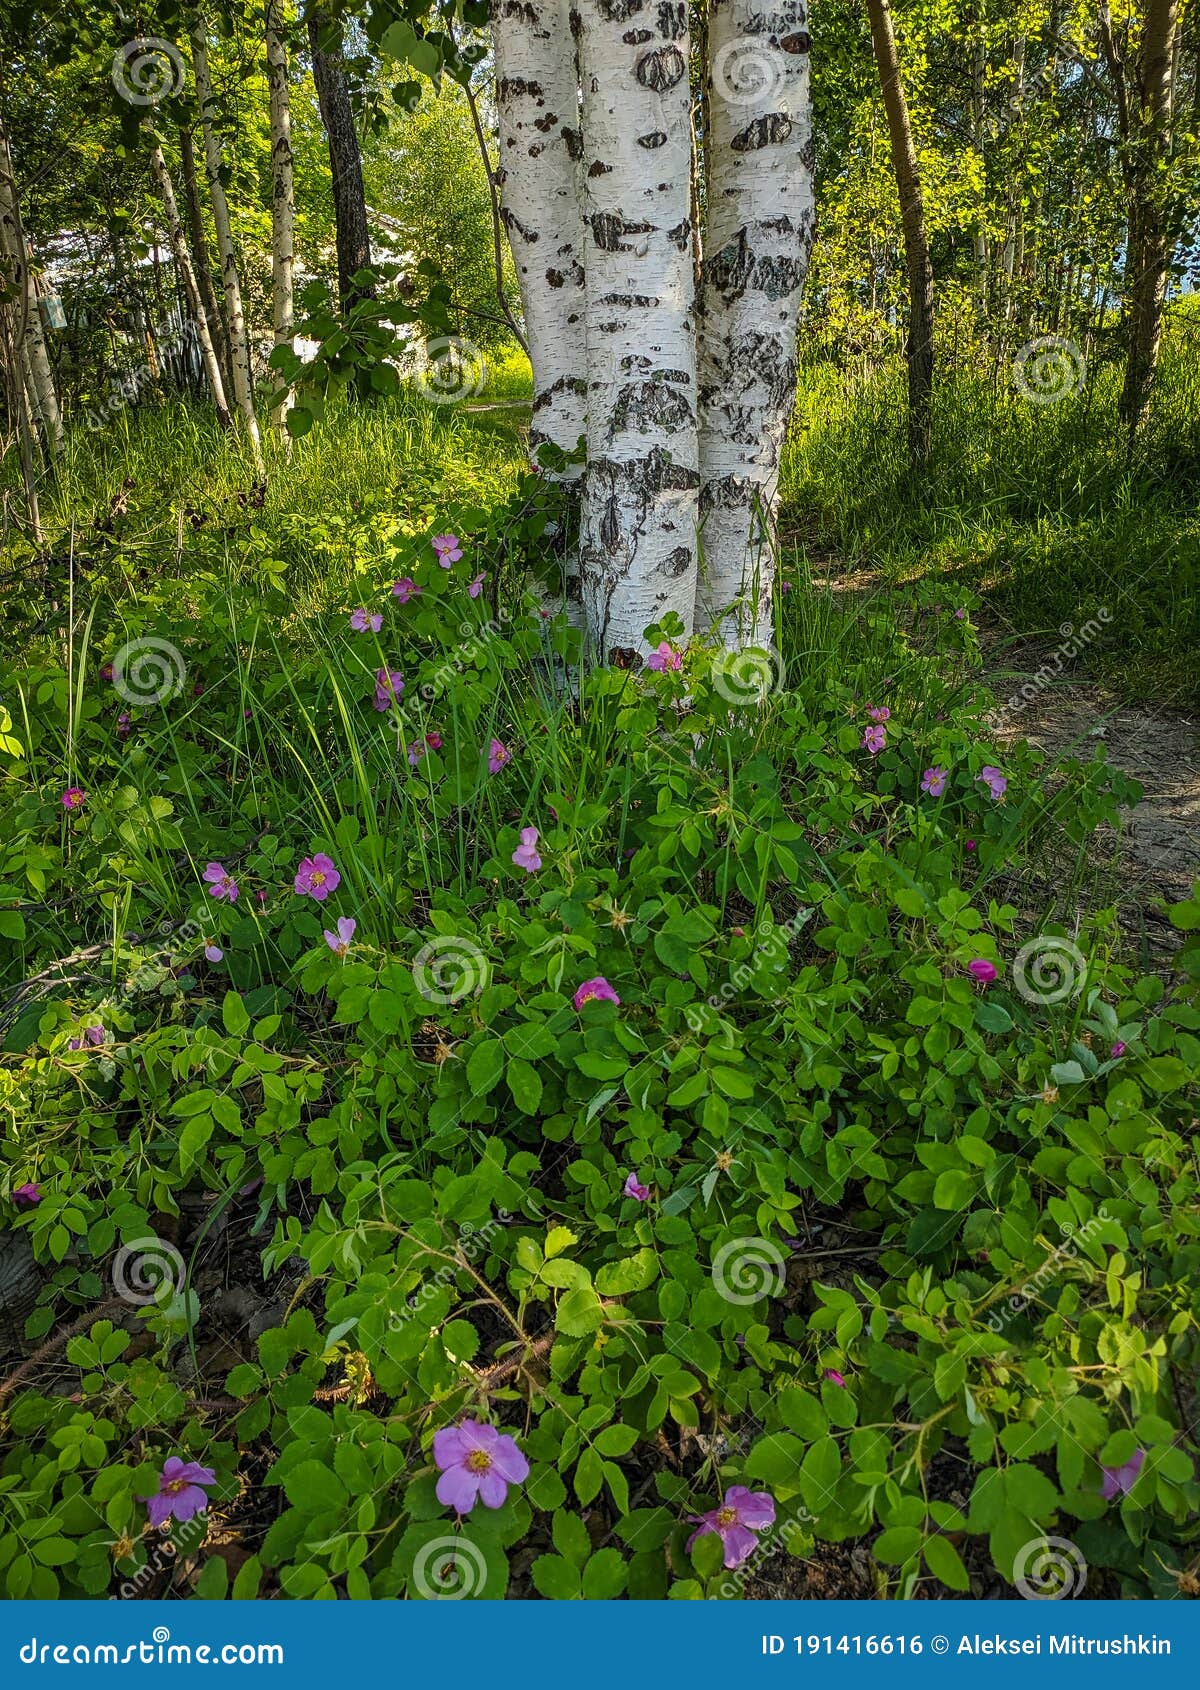 Noyabrsk, Russia - May 30, 2020: a Forest Path Passes Near the Birches